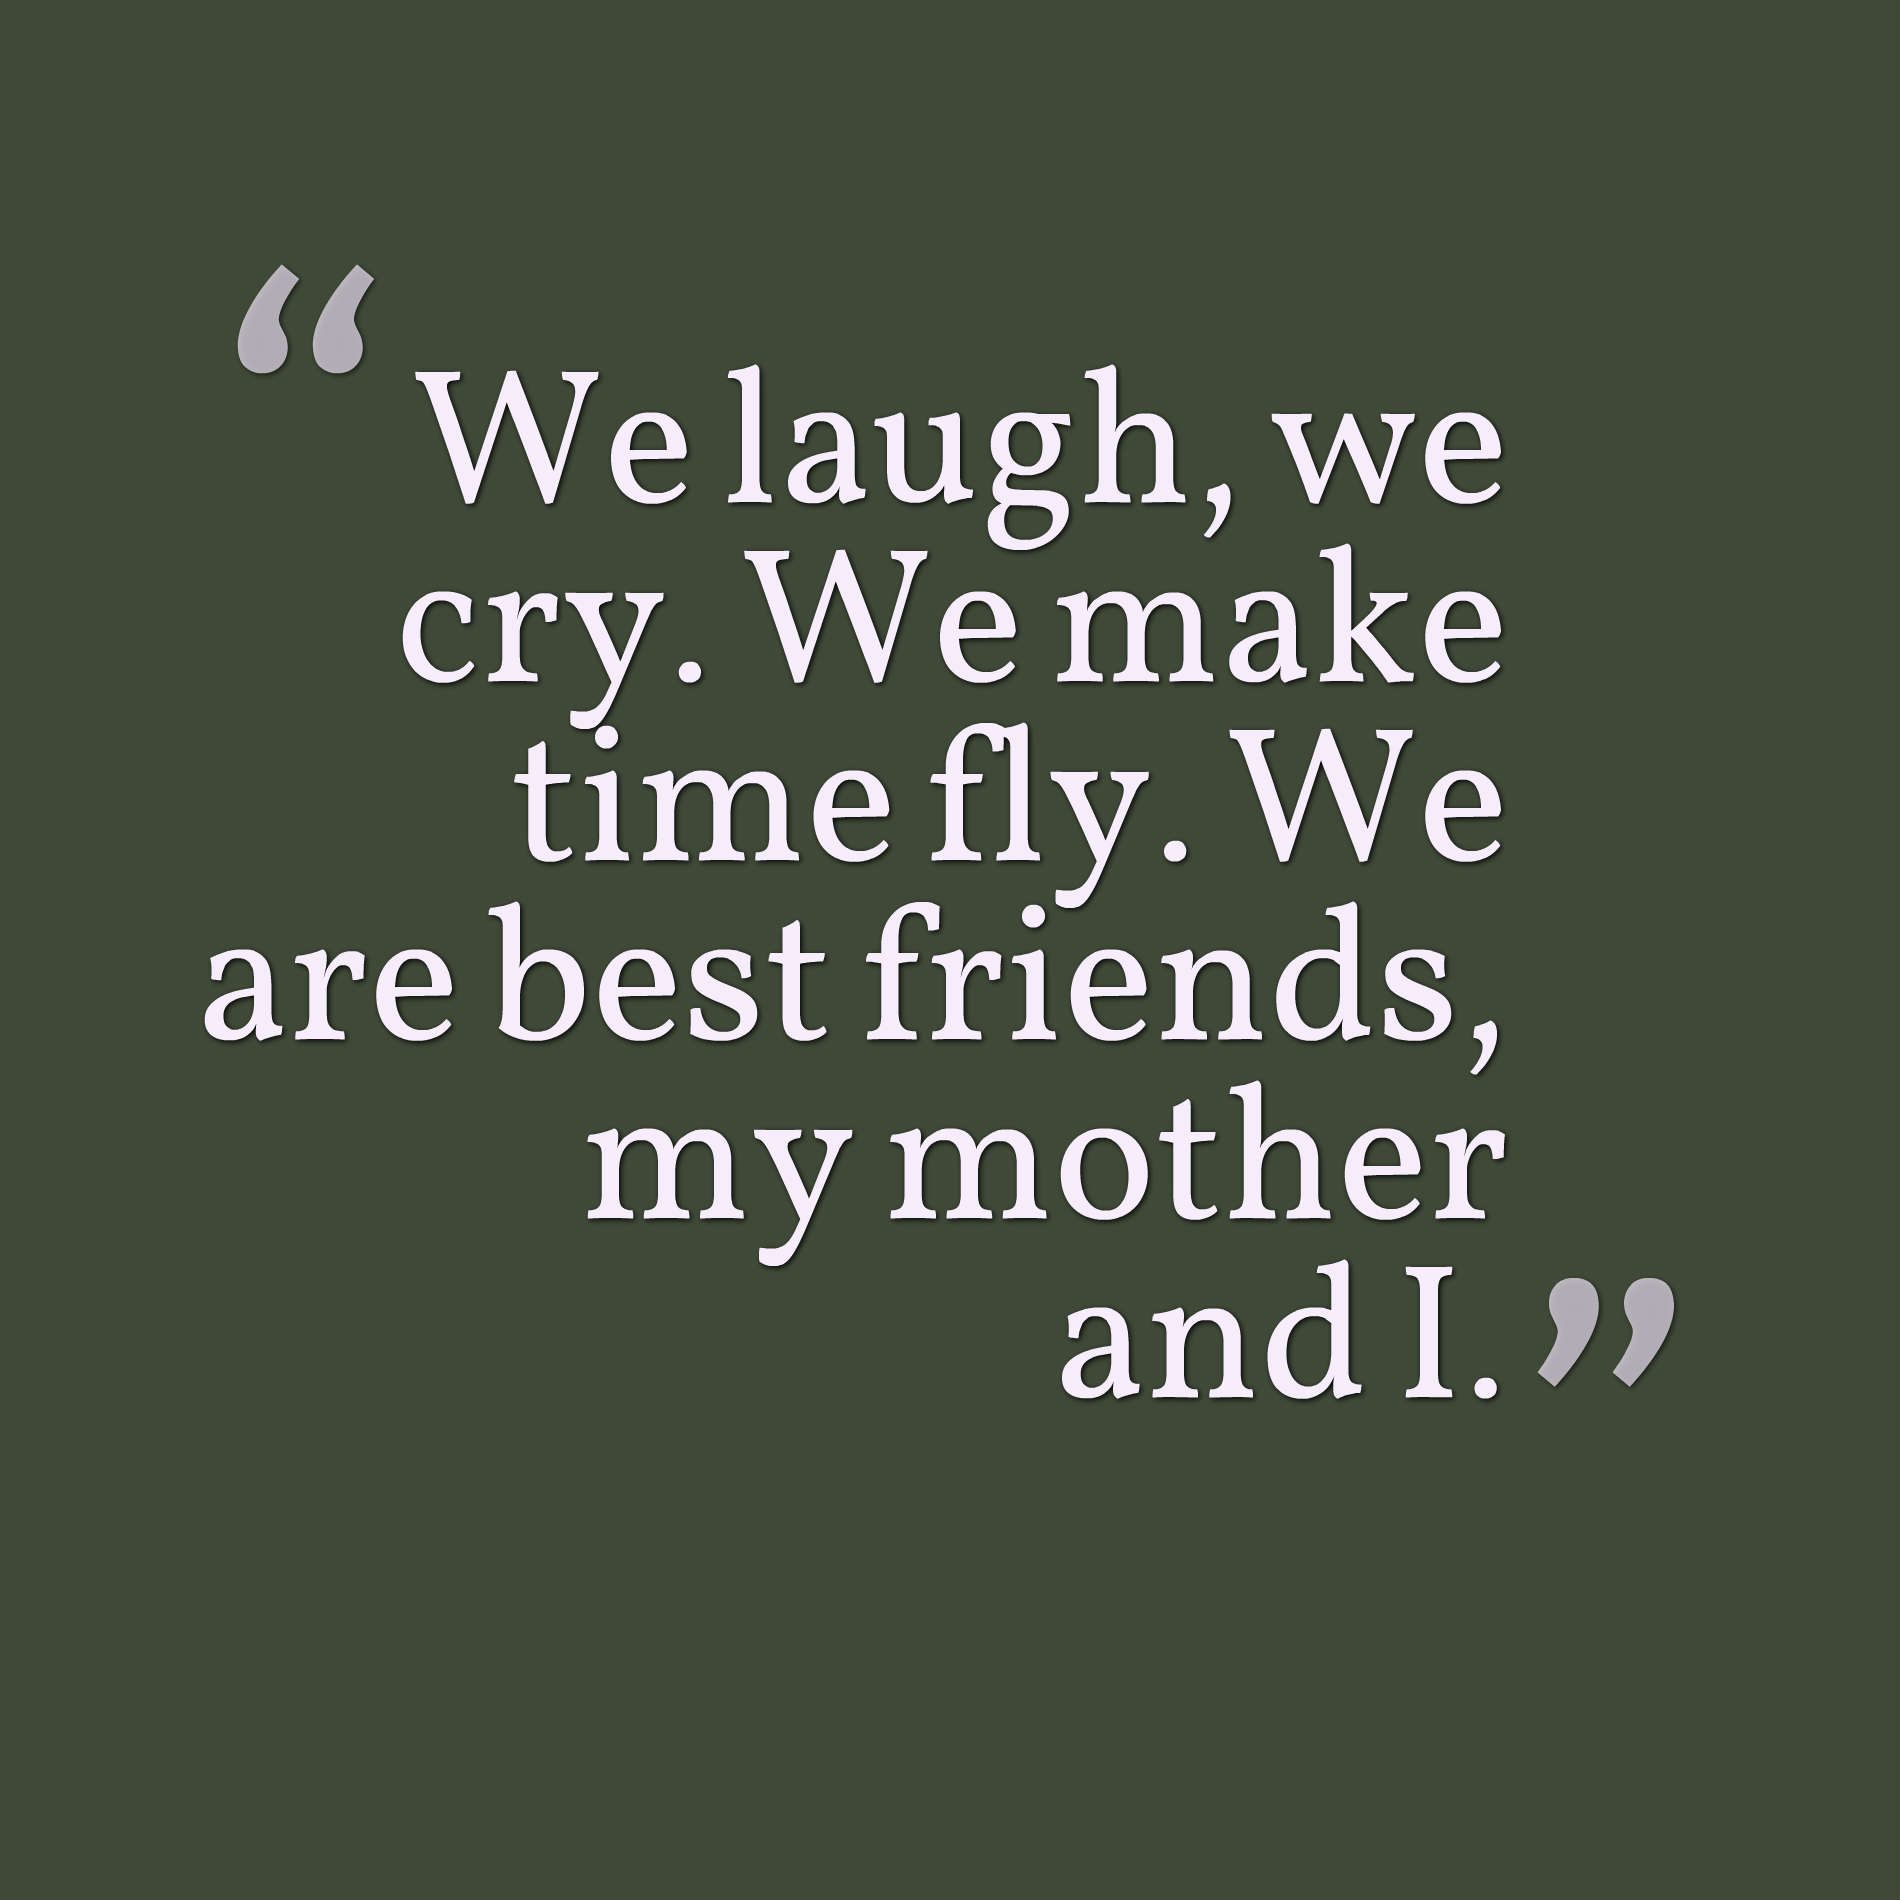 We laugh, we cry. We make time fly. We are best friends, my mother and I.